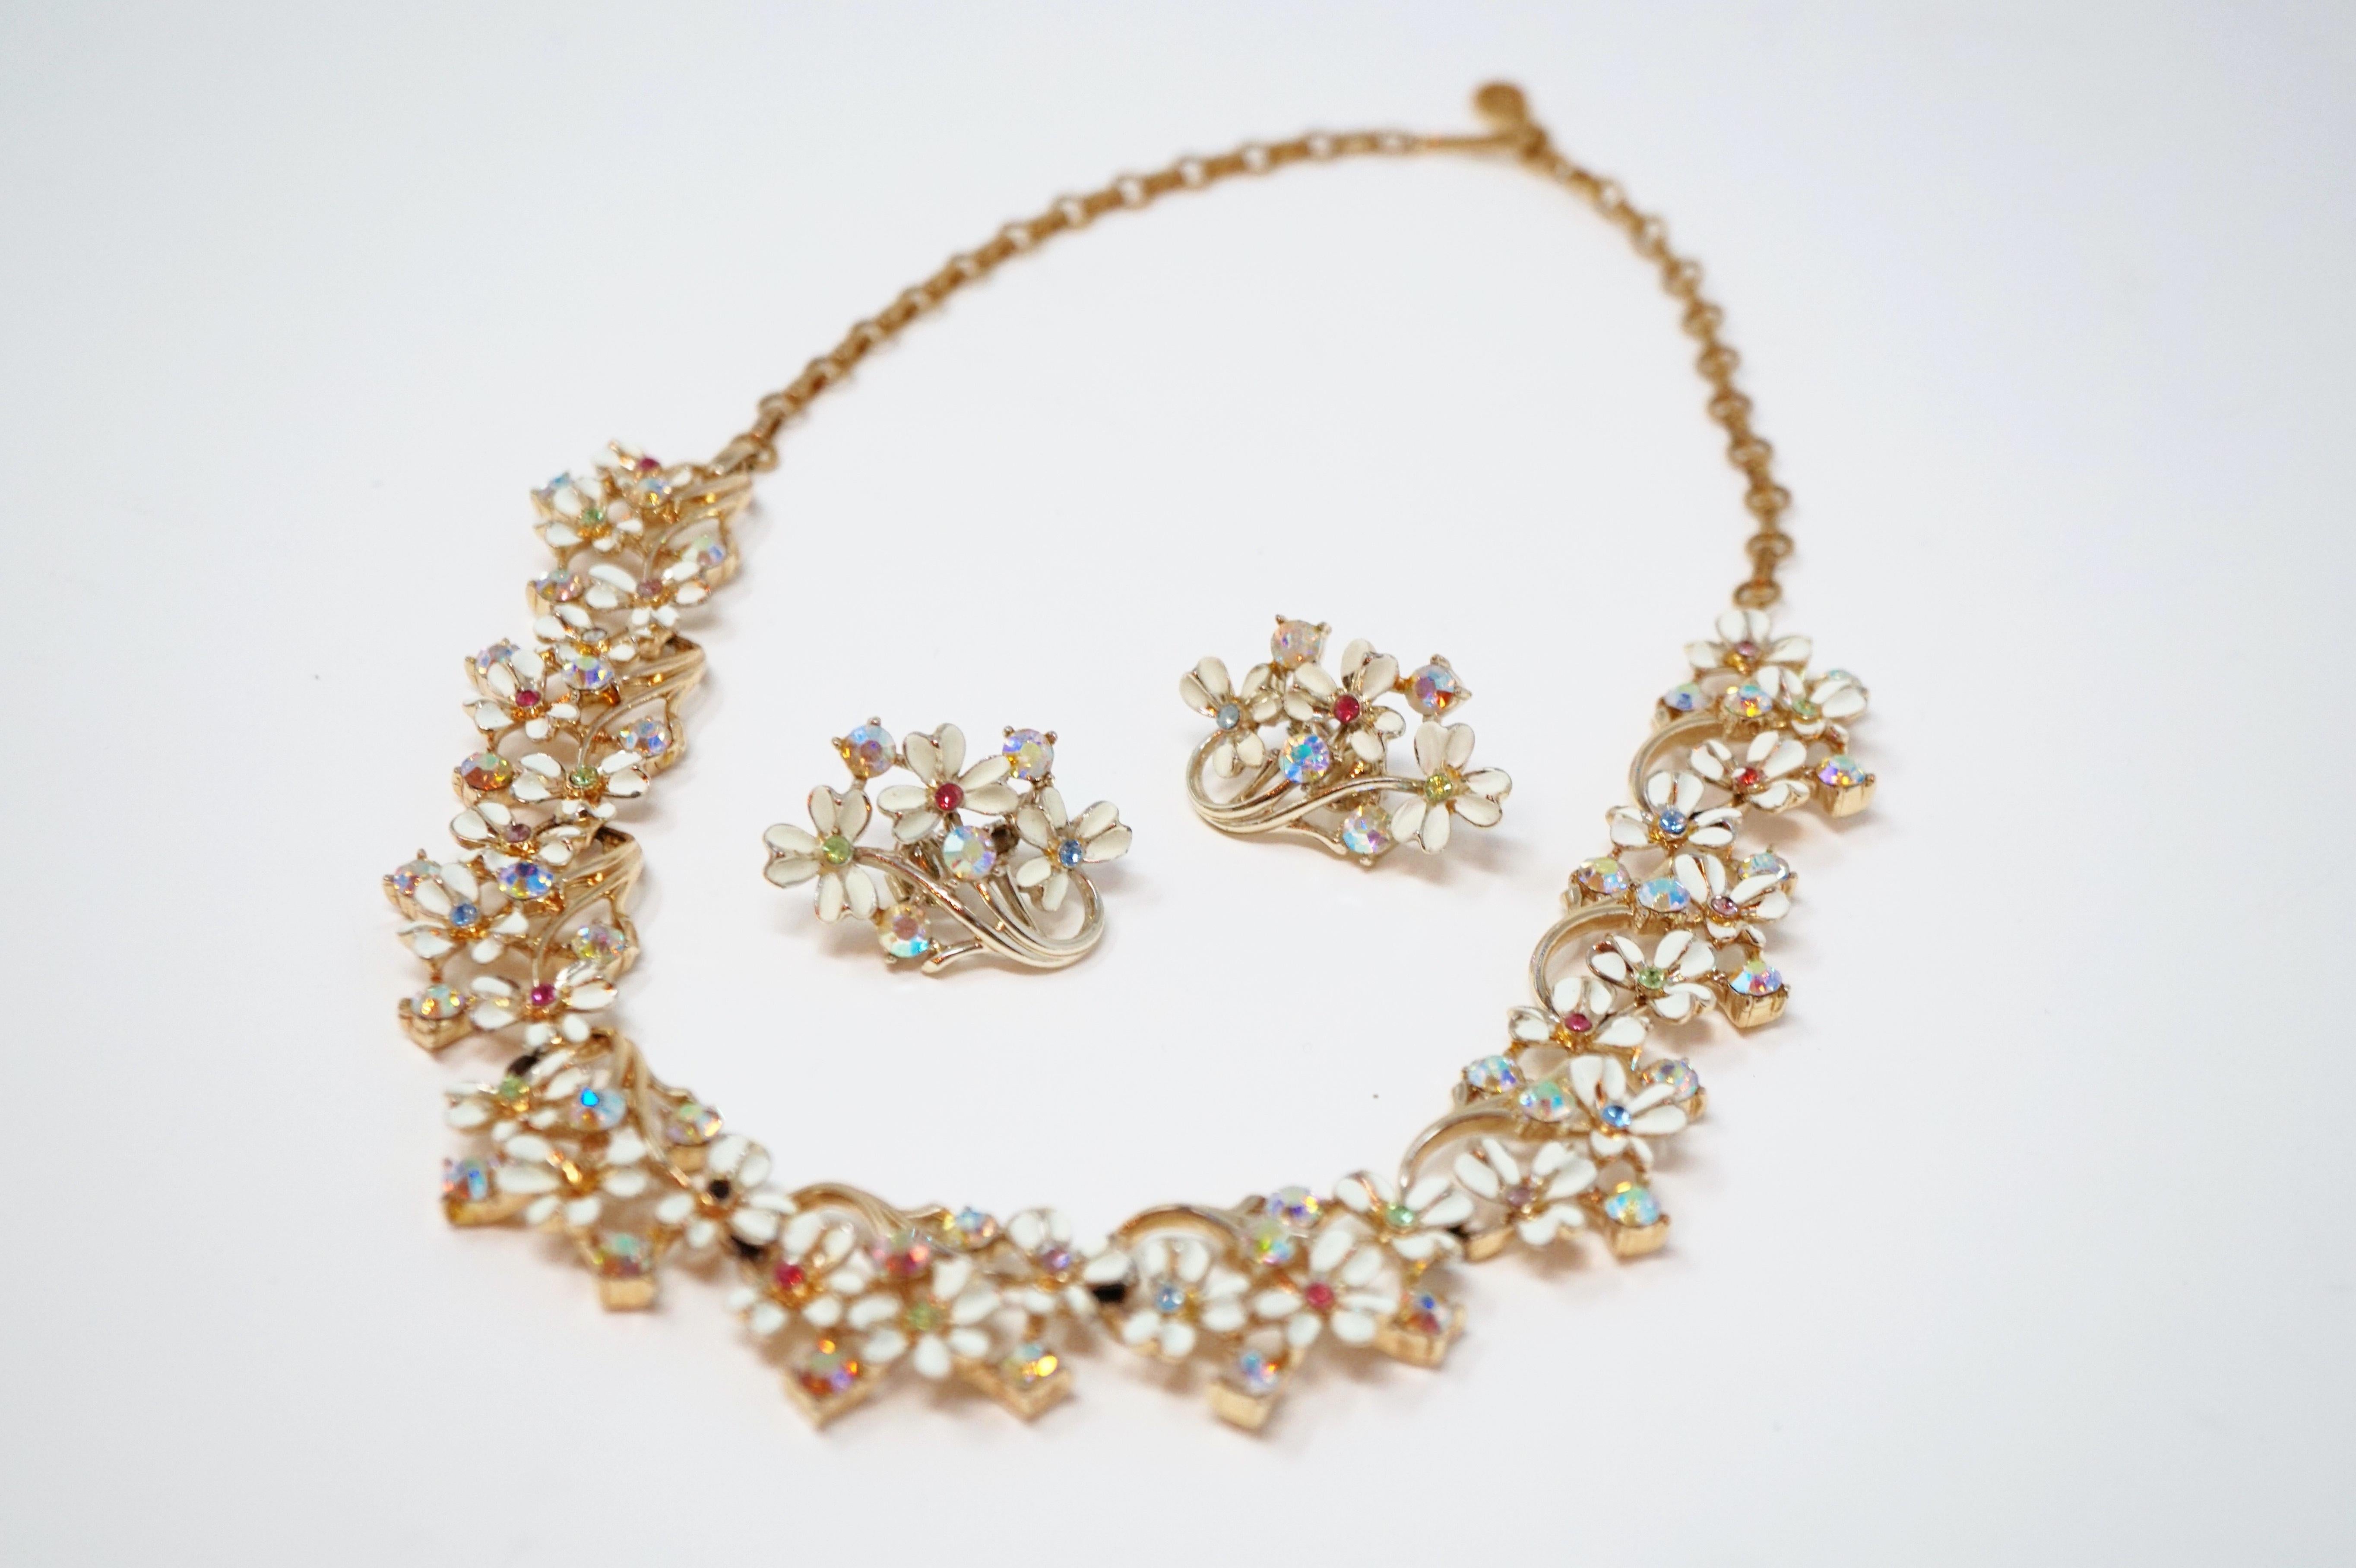 This rare and stunning demi-parure necklace and earring set by Coro, circa 1960s, is absolutely dreamy!  White enameling and pastel Aurora Borealis crystals decorate a bouquet of gilded flowers in this rare treasure from the iconic vintage costume